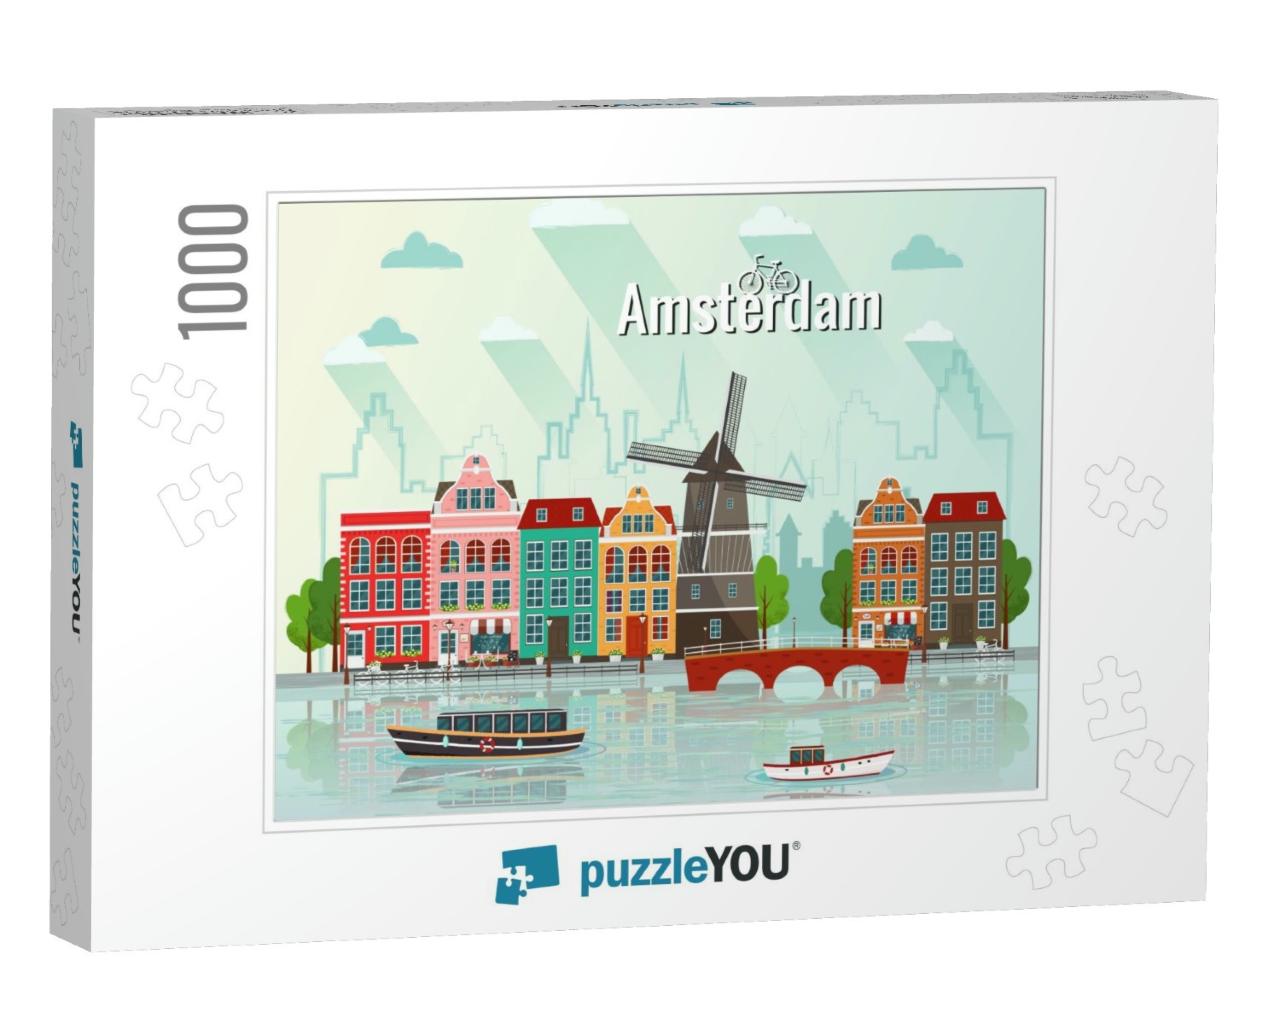 Vector Illustration of Amsterdam. Old European City... Jigsaw Puzzle with 1000 pieces